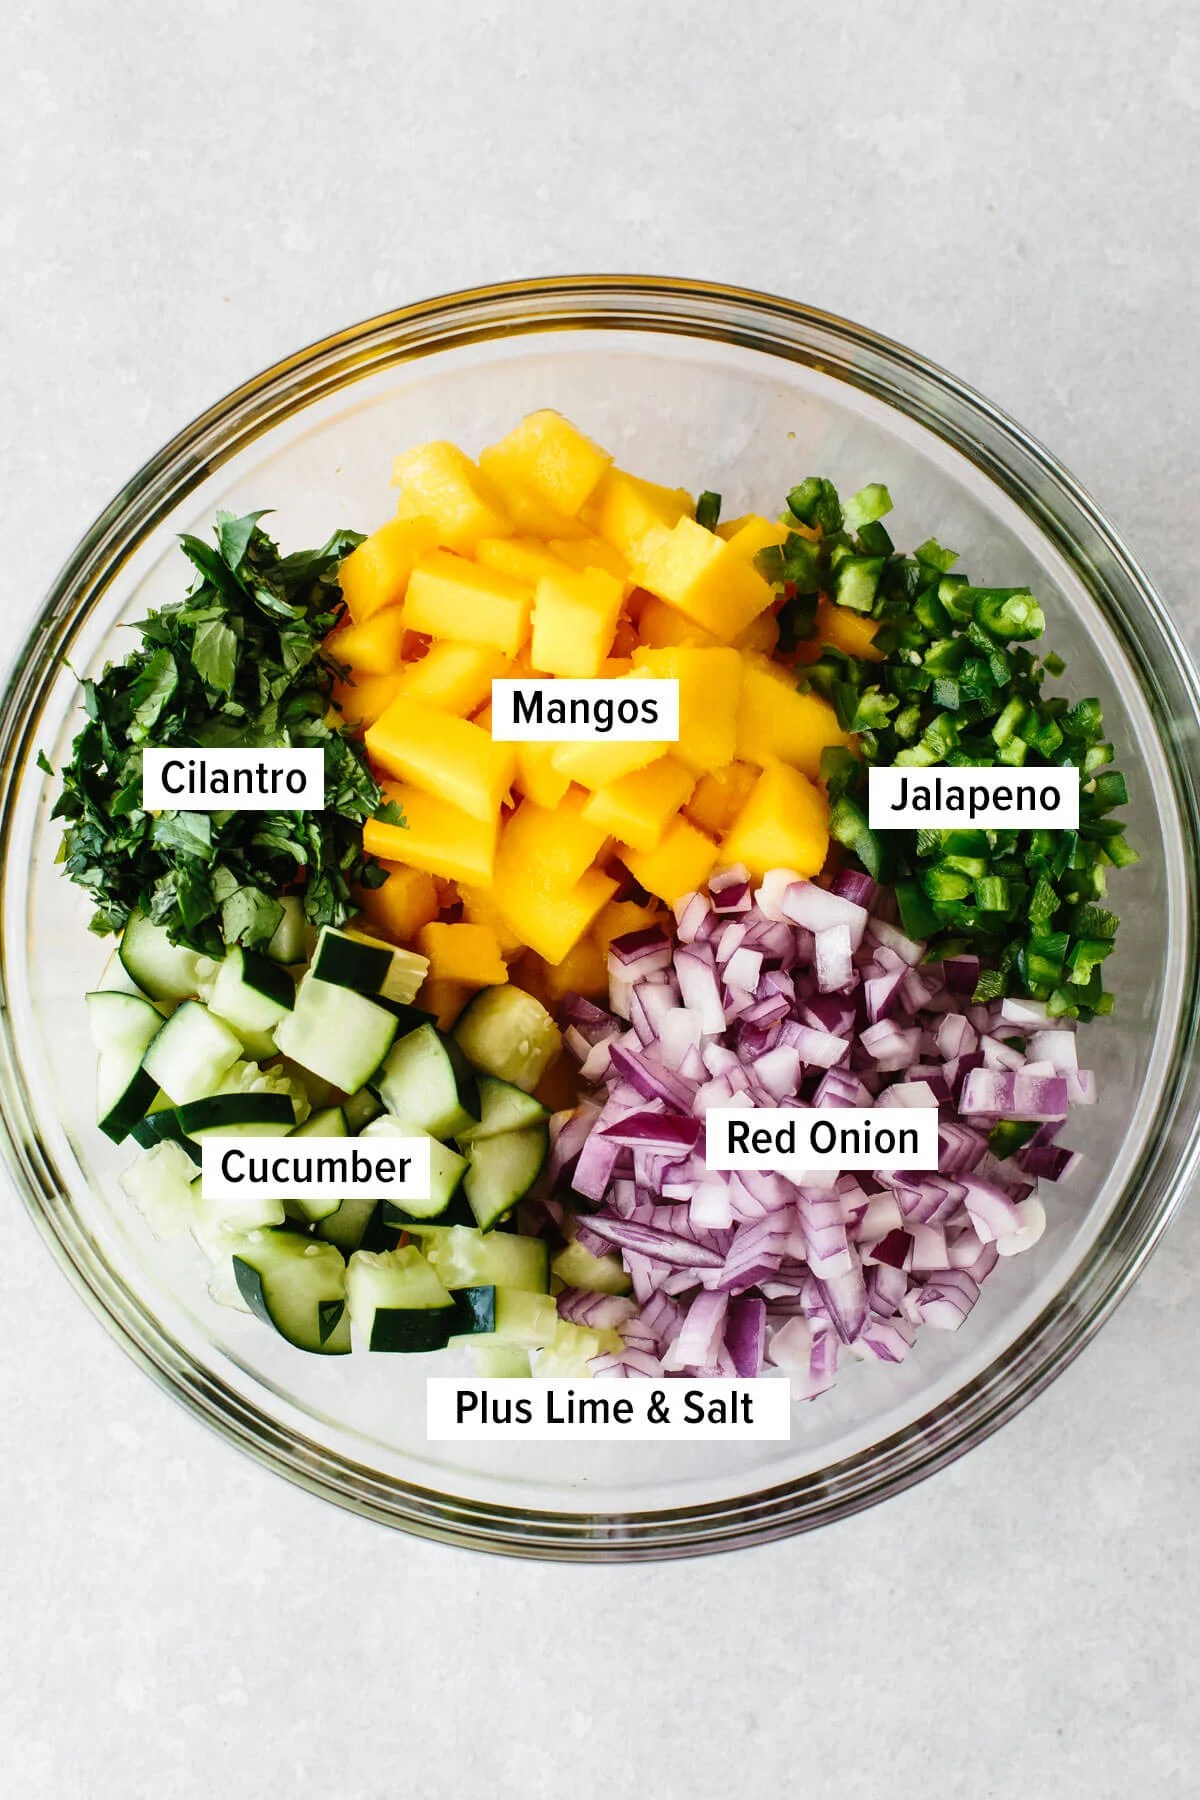 Ingredients for mango salsa in a bowl.